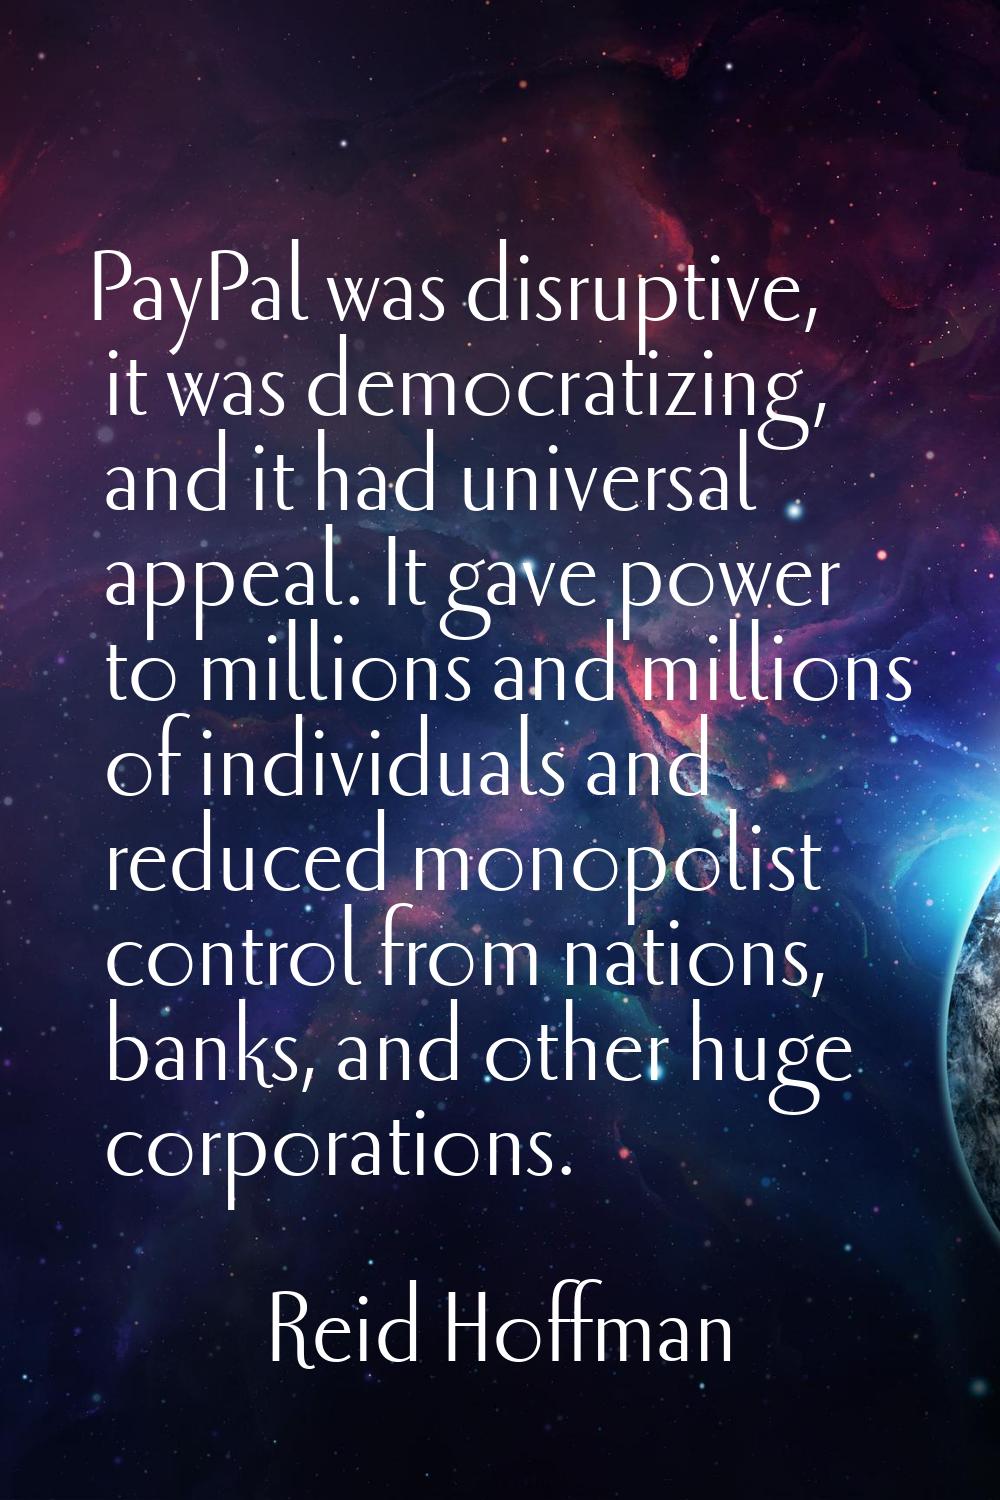 PayPal was disruptive, it was democratizing, and it had universal appeal. It gave power to millions